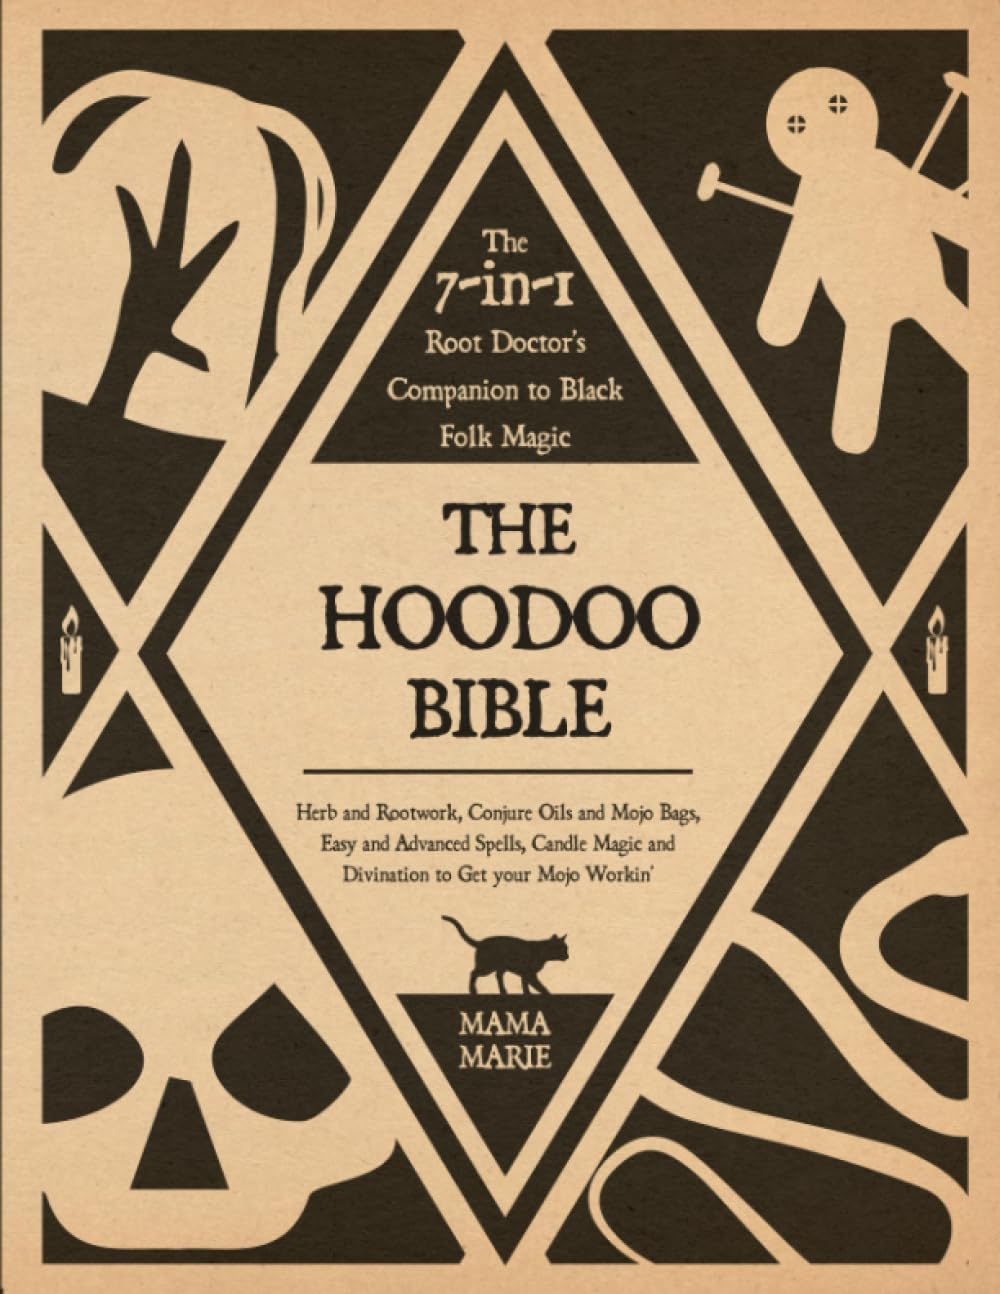 The Hoodoo Bible • The 7-in-1 Root Doctor’s Companion To Black Folk Magic: Herb And Rootwork, Conjure Oils And Mojo Bags, Easy And Advanced Spells, Candle Magic And Divination To Get Your Mojo Workin’